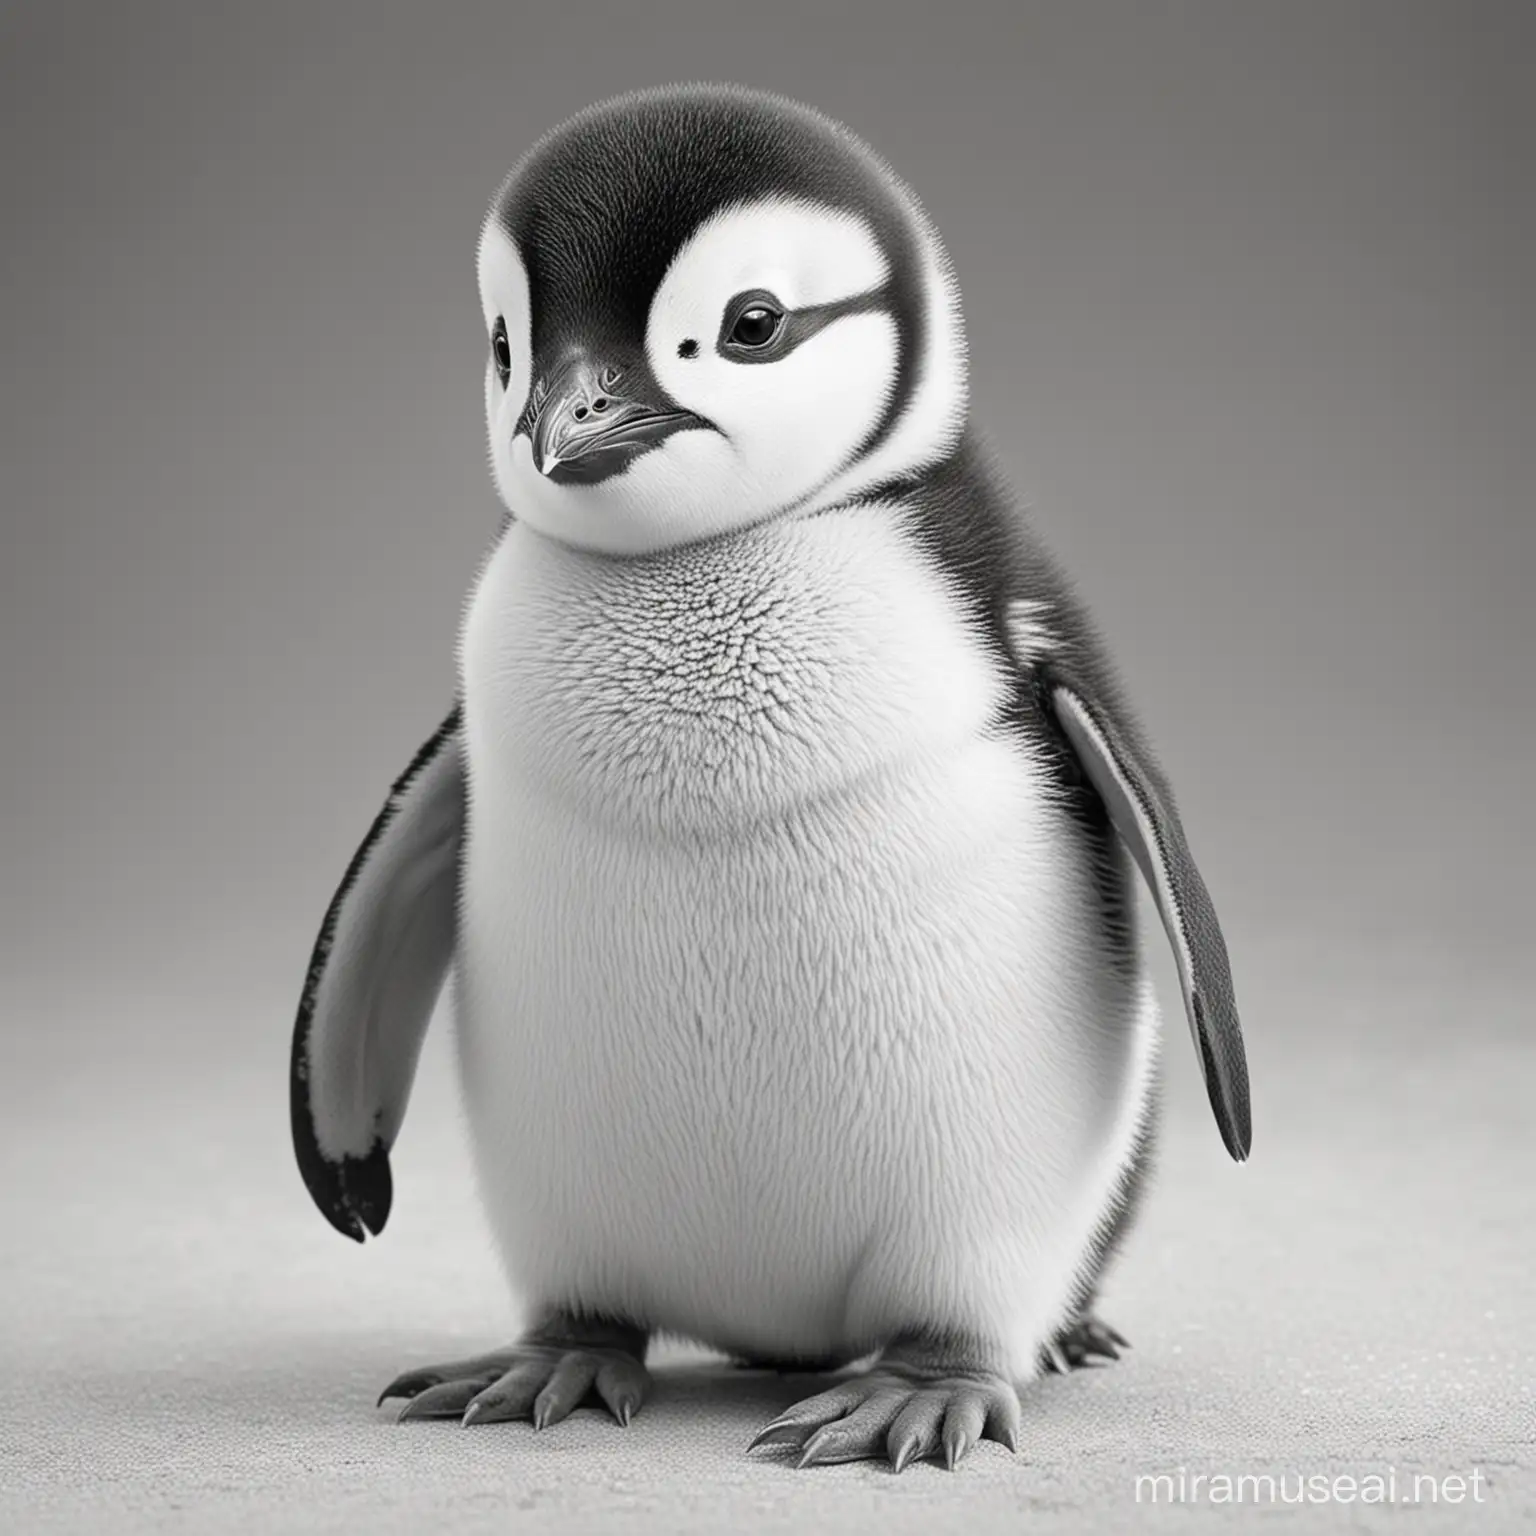 clean coloring book page of a baby penguin, black and white